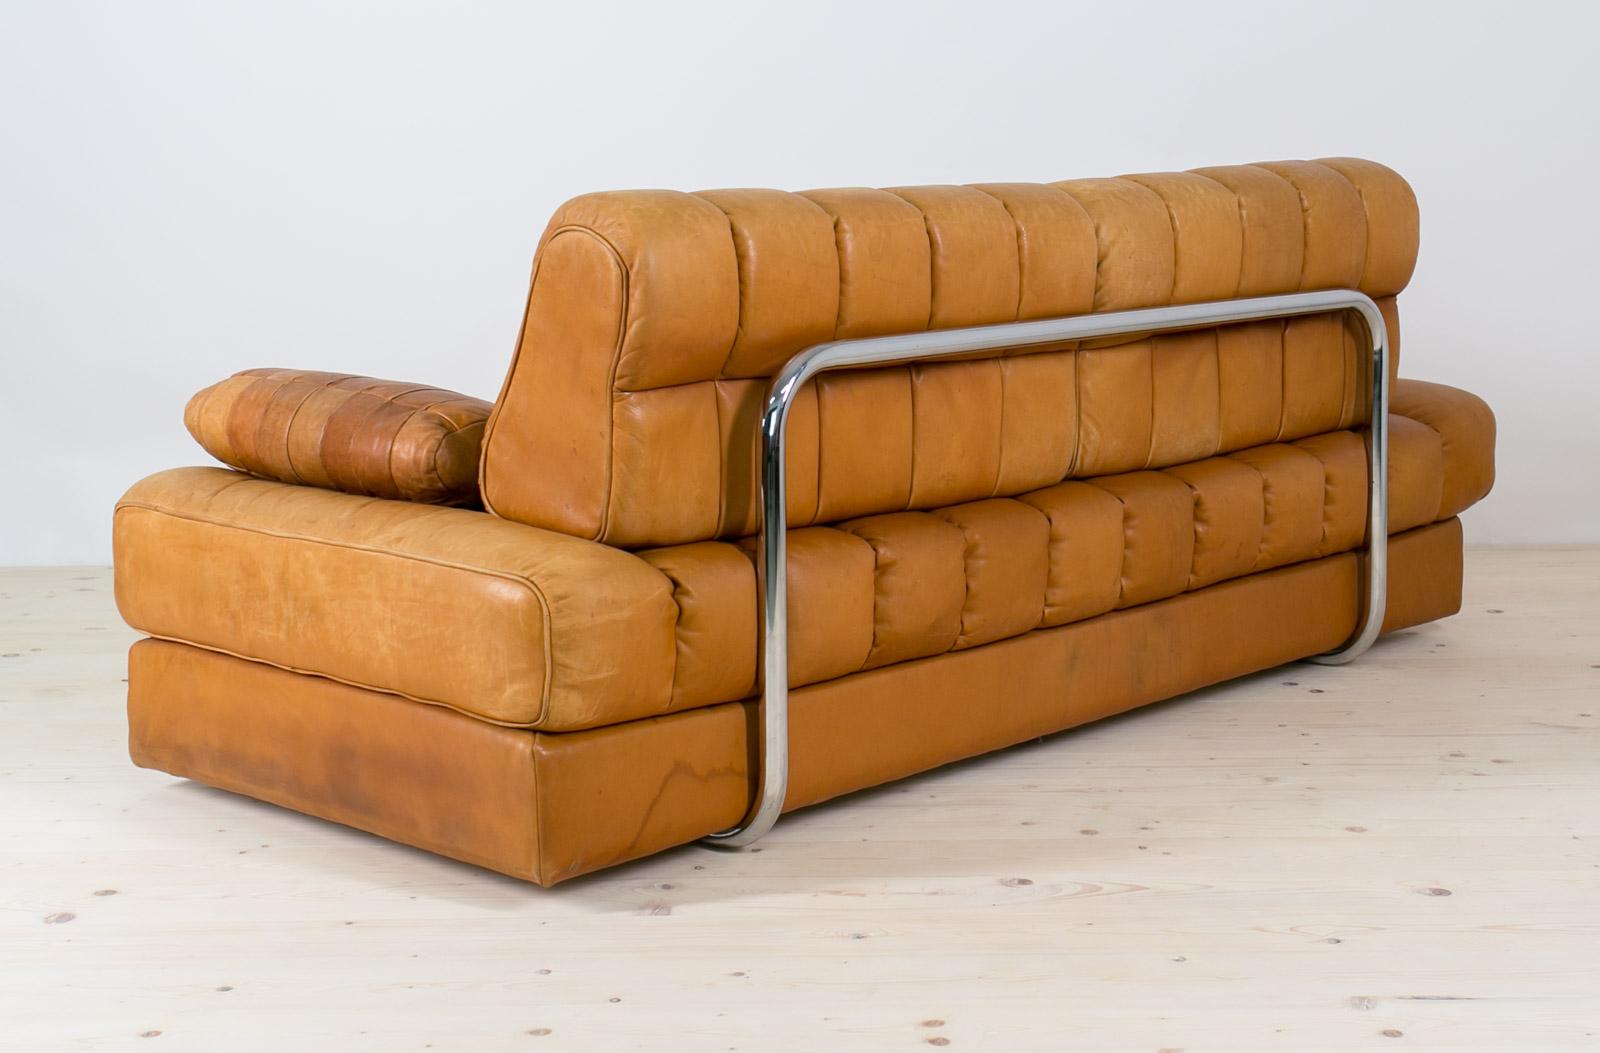 Vintage Swiss De Sede Sofa Bed from the 1960s, model DS 85 2